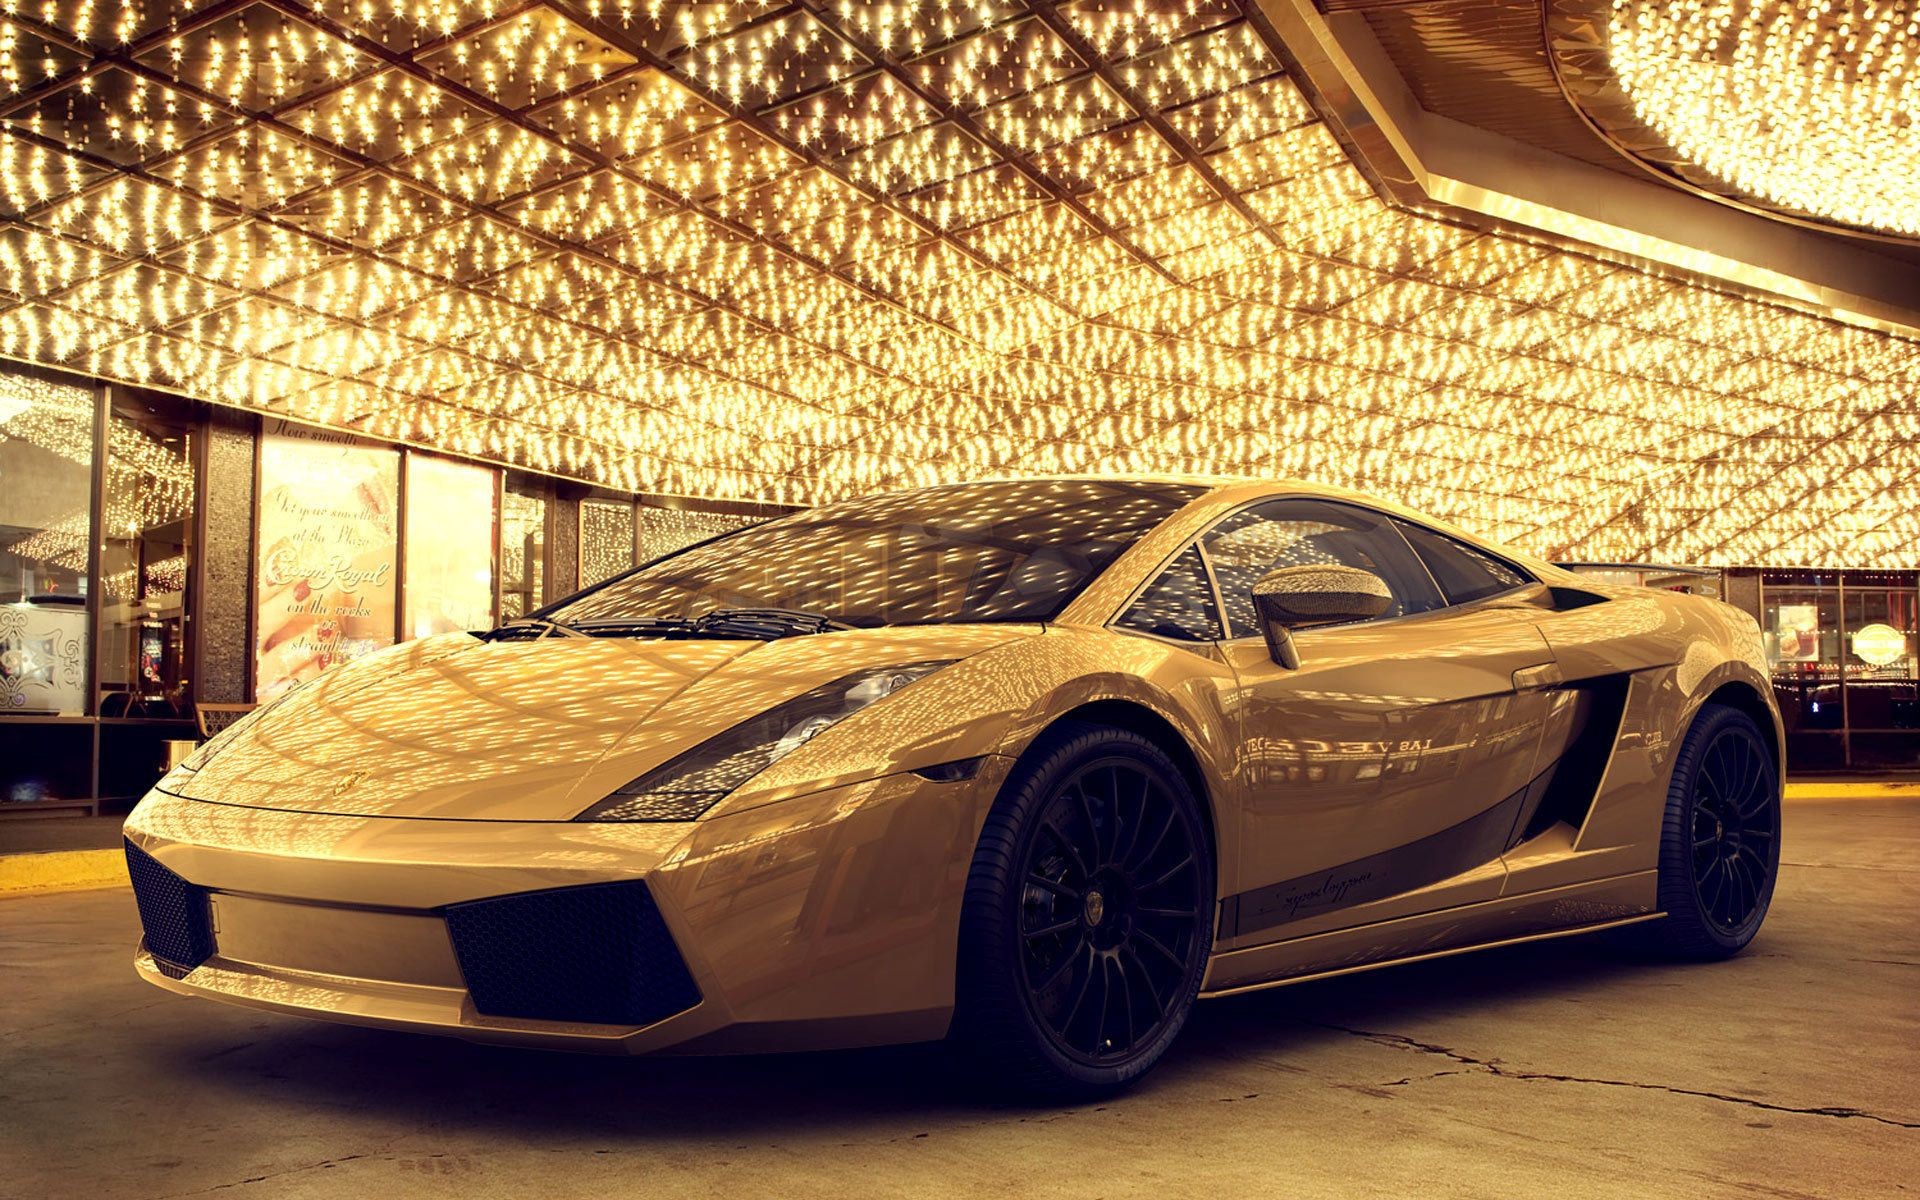 1920x1200 Beautiful HD Wallpapers very attractive.Top HD Wallpapers very wonderful. Gold Plated Lamborghini Aventador